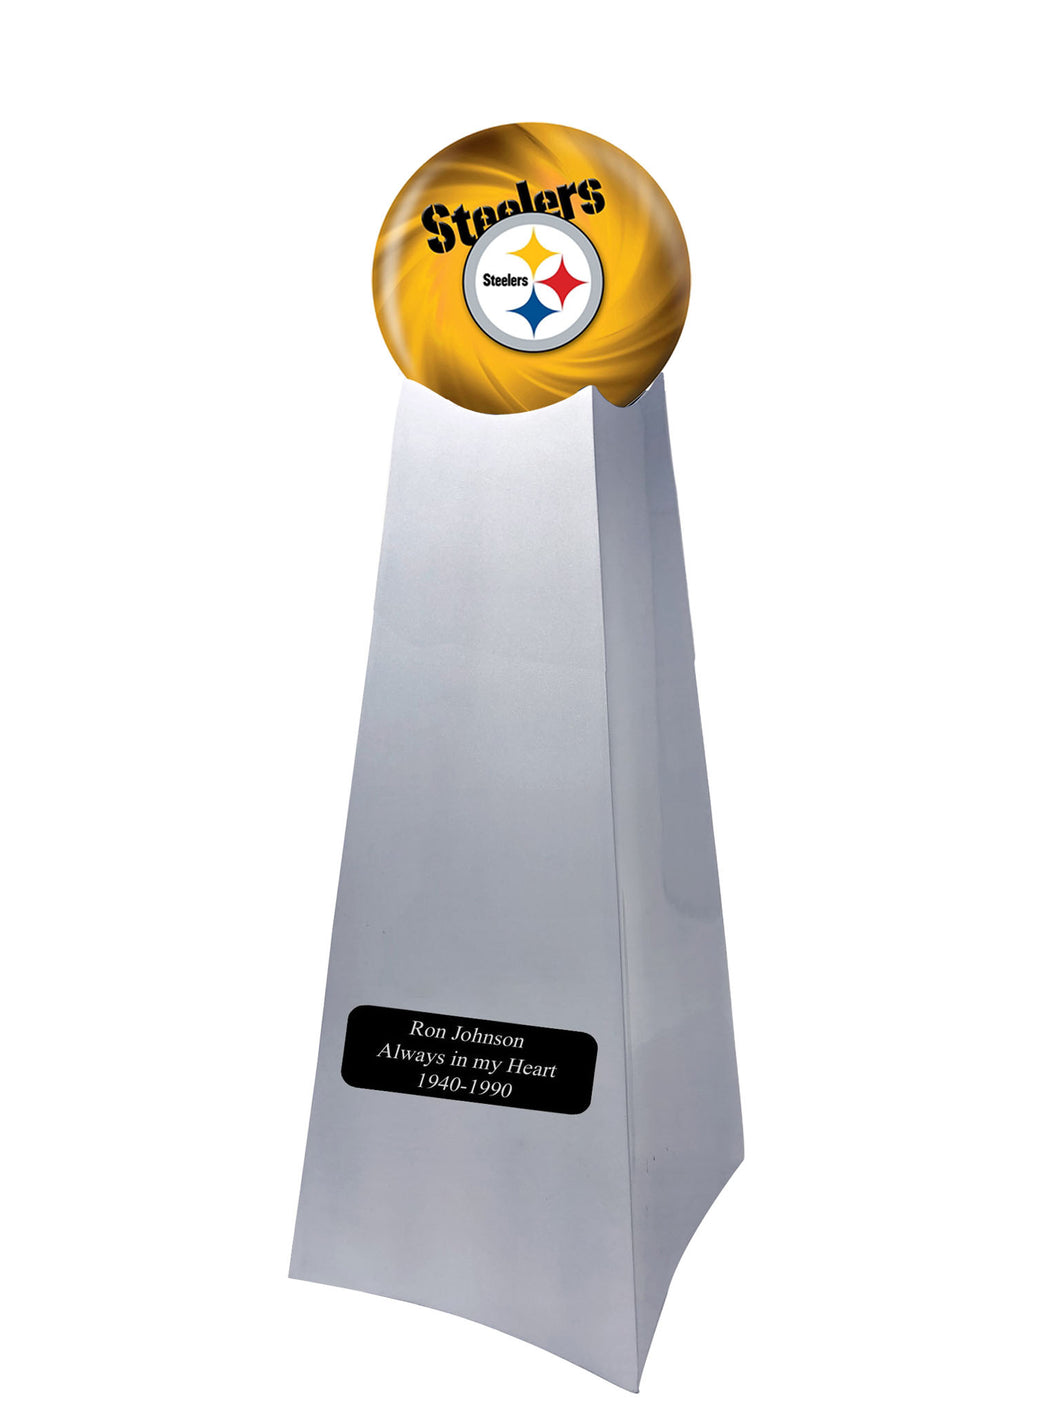 Championship Trophy Cremation Urn with Optional Football and Pittsburgh Steelers Ball Decor and Custom Metal Plaque - Memorials4u